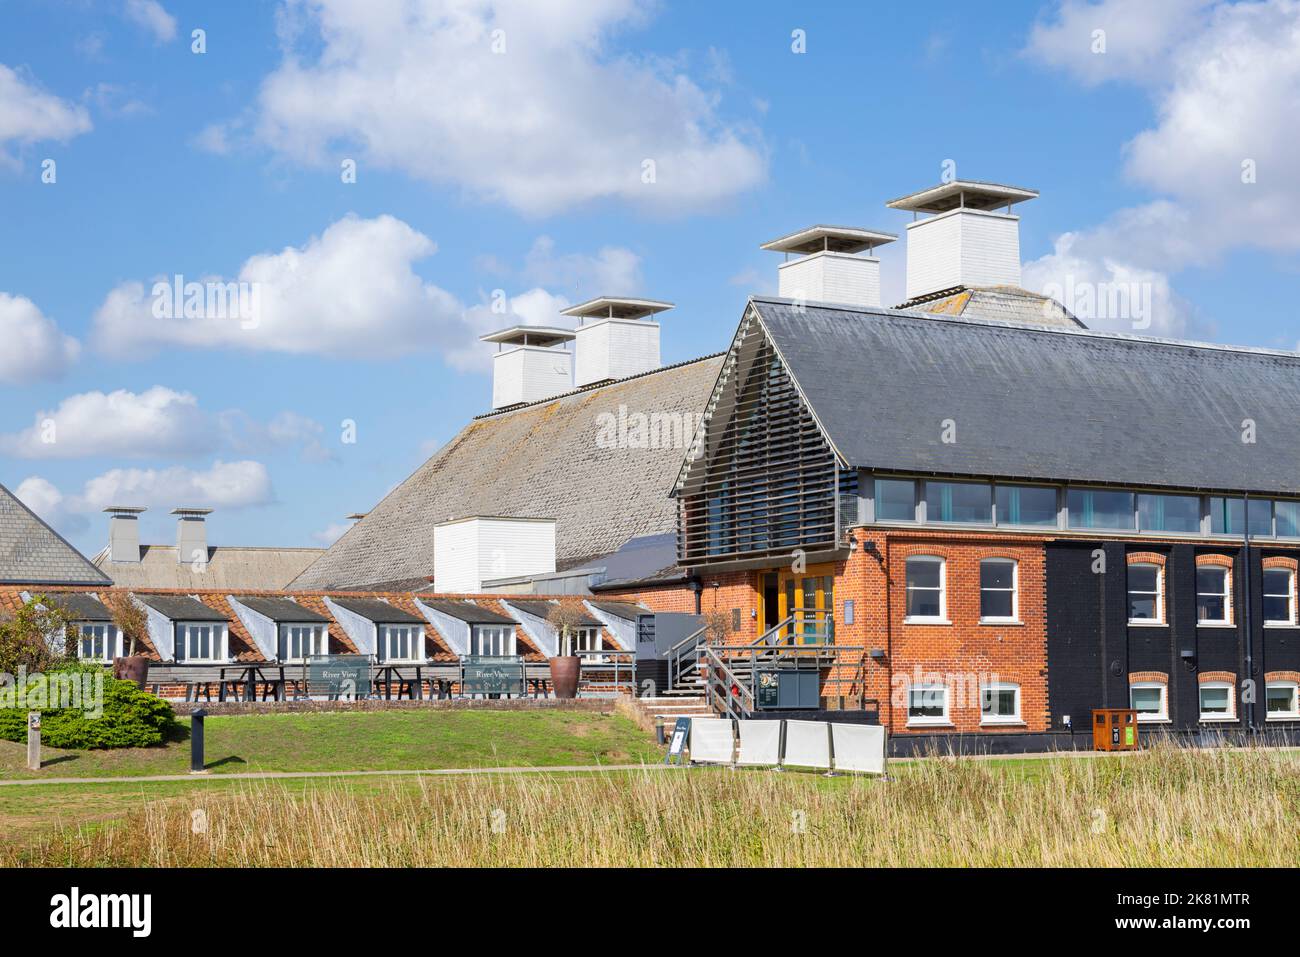 Salle de concert Snape Maltings Snape Suffolk Angleterre GB Europe Banque D'Images